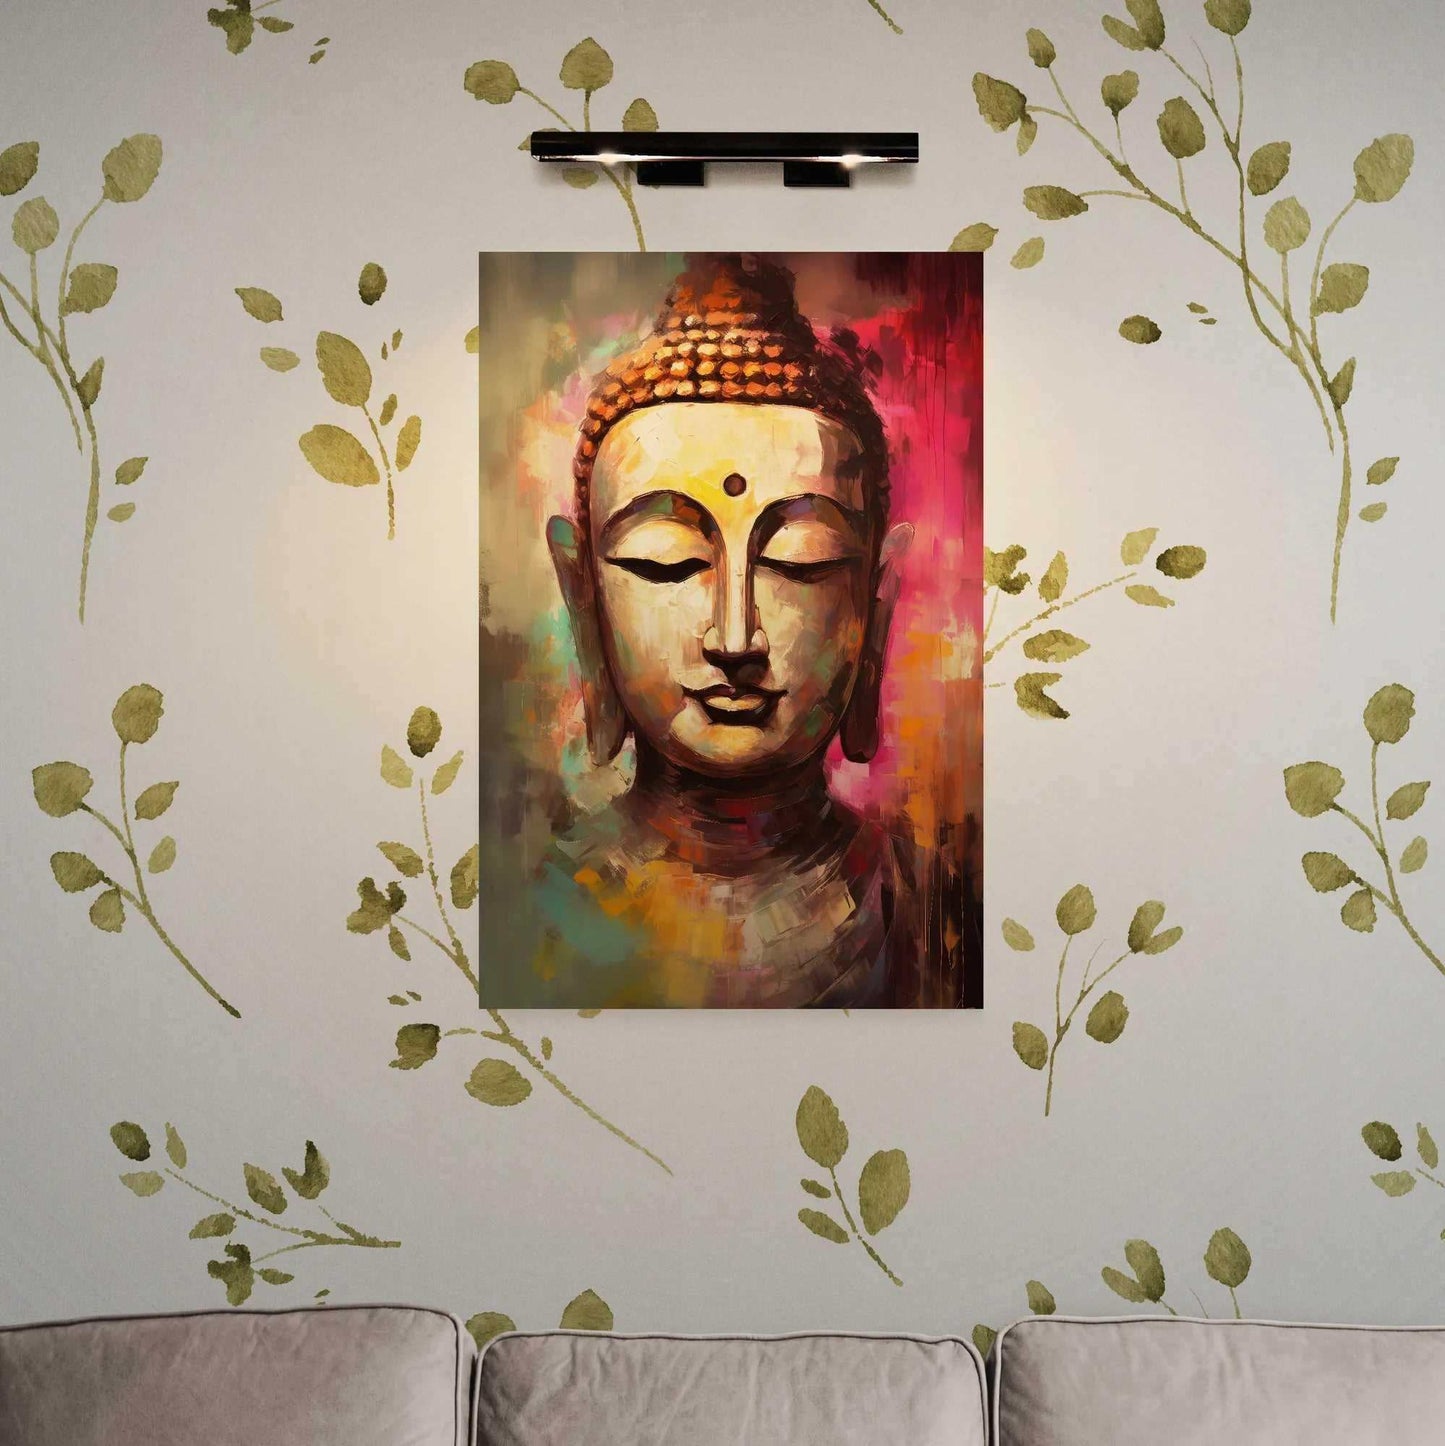 ZenArtBliss.com's Abstract Modern Buddha poster, a vibrant abstract meditation art with a fusion of colors on a matte finish paper.